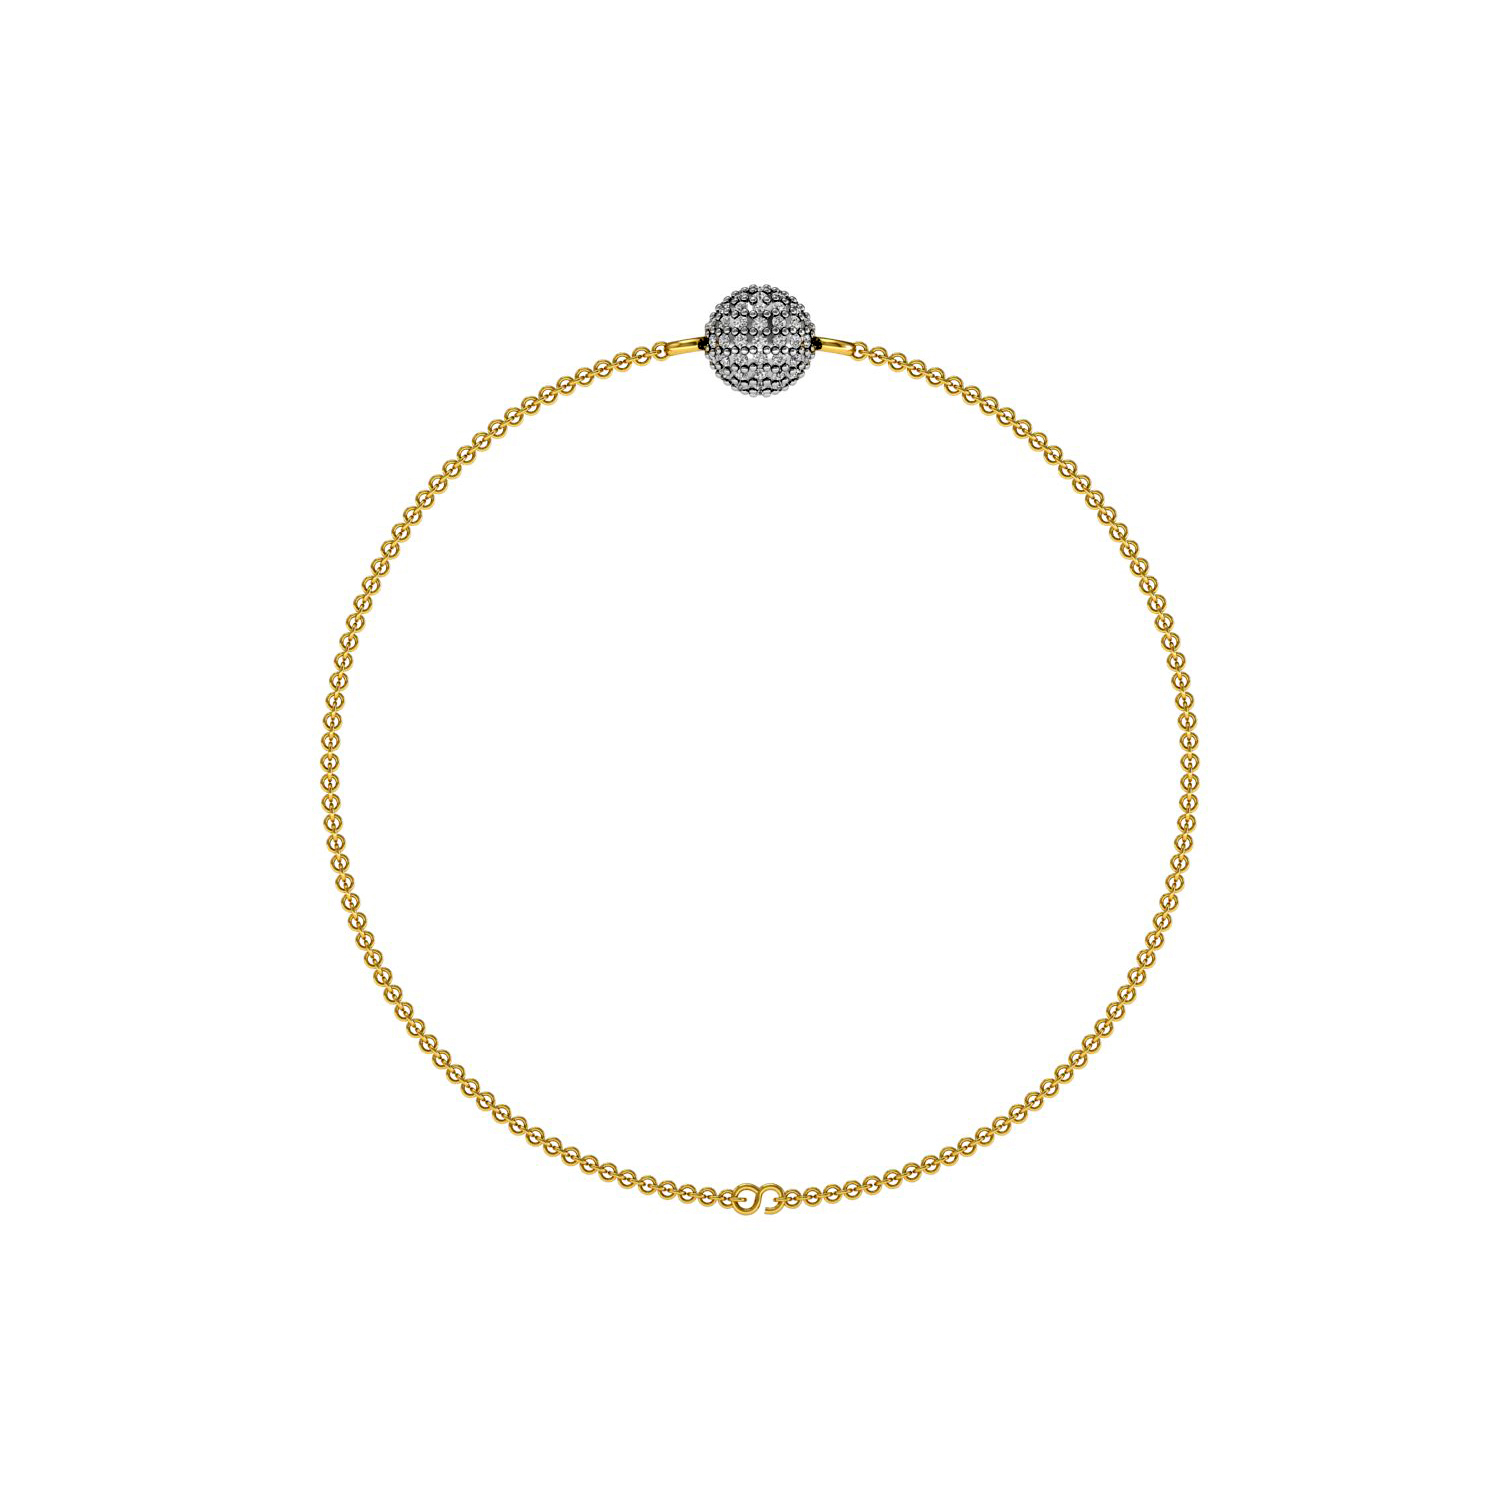 Solid gold chain bead bracelet with natural diamond